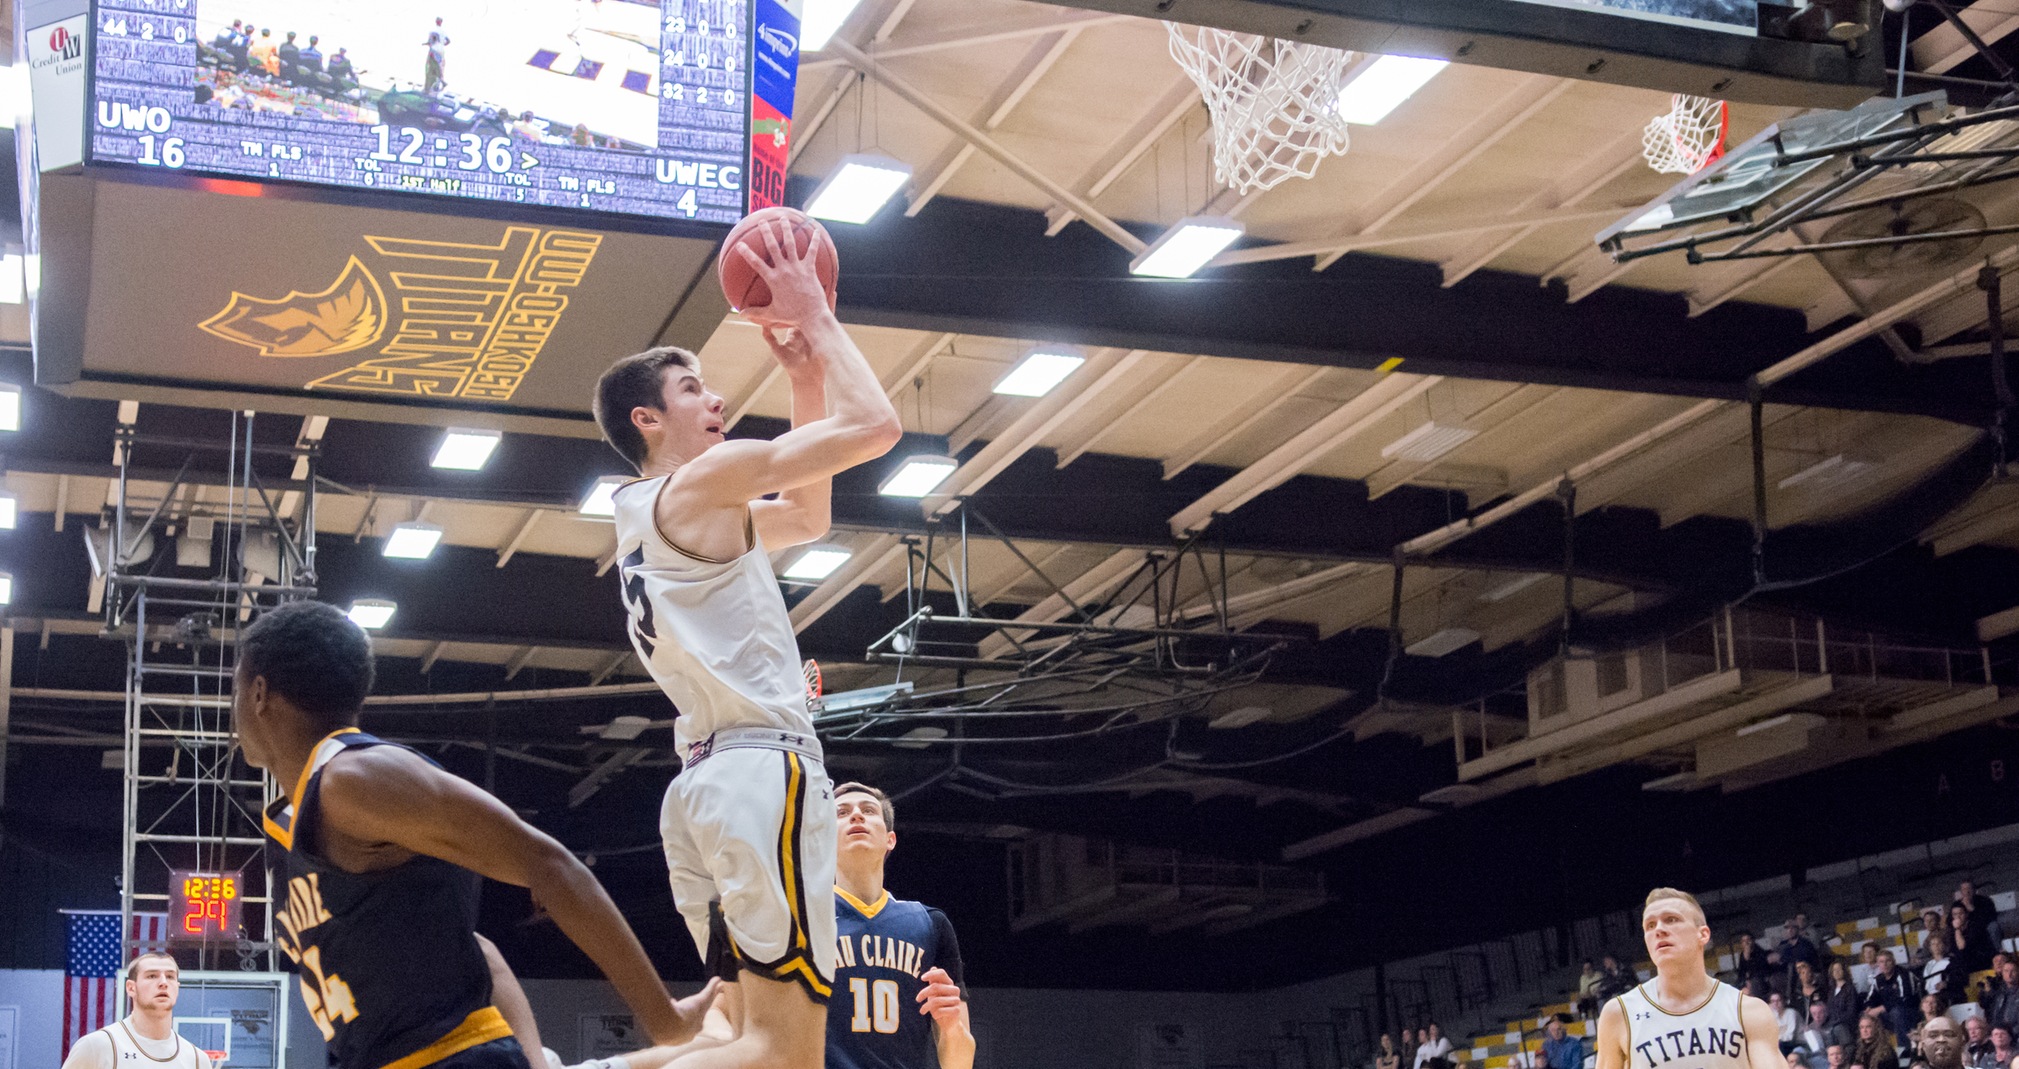 Adam Fravert scored 15 points and grabbed 4 rebounds against the Blugolds.